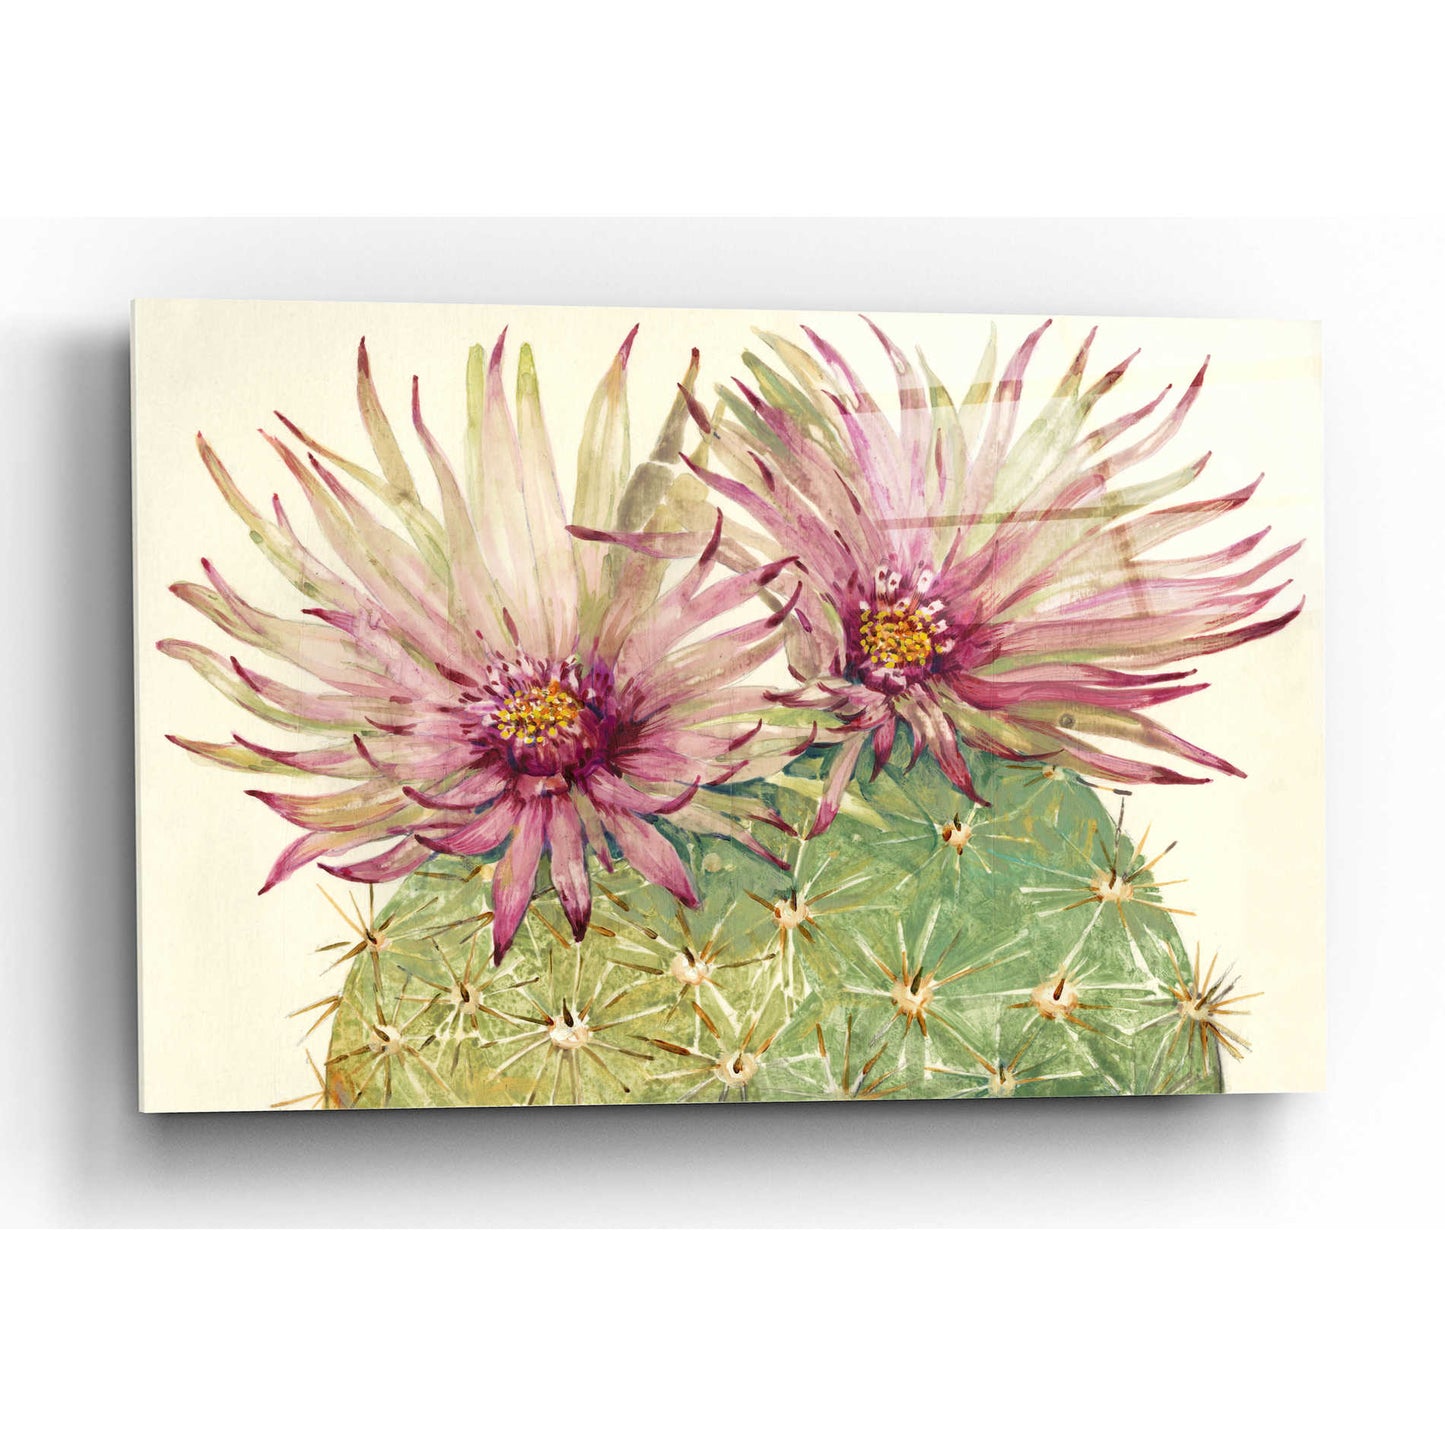 Epic Art 'Cactus Blossoms I' by Tim O'Toole, Acrylic Glass Wall Art,16x12